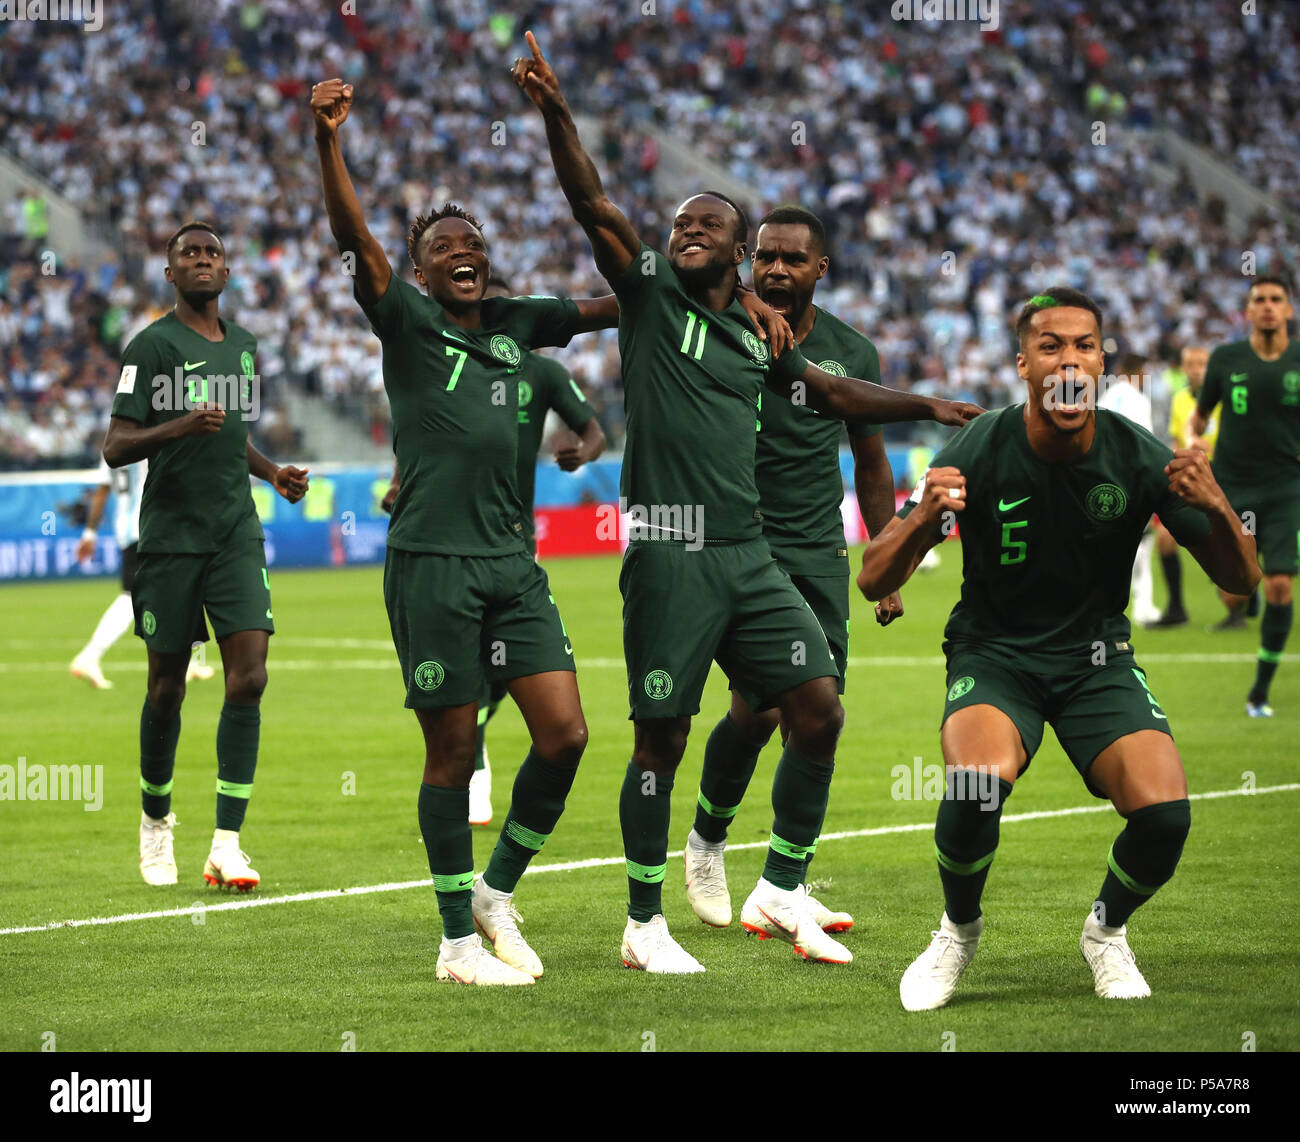 Saint Petersburg, Russia. 26th June, 2018. Victor Moses (C) of Nigeria celebrates scoring with teammates during the 2018 FIFA World Cup Group D match between Nigeria and Argentina in Saint Petersburg, Russia, June 26, 2018. Argentina won 2-1 and advanced to the round of 16. Credit: Wu Zhuang/Xinhua/Alamy Live News Stock Photo